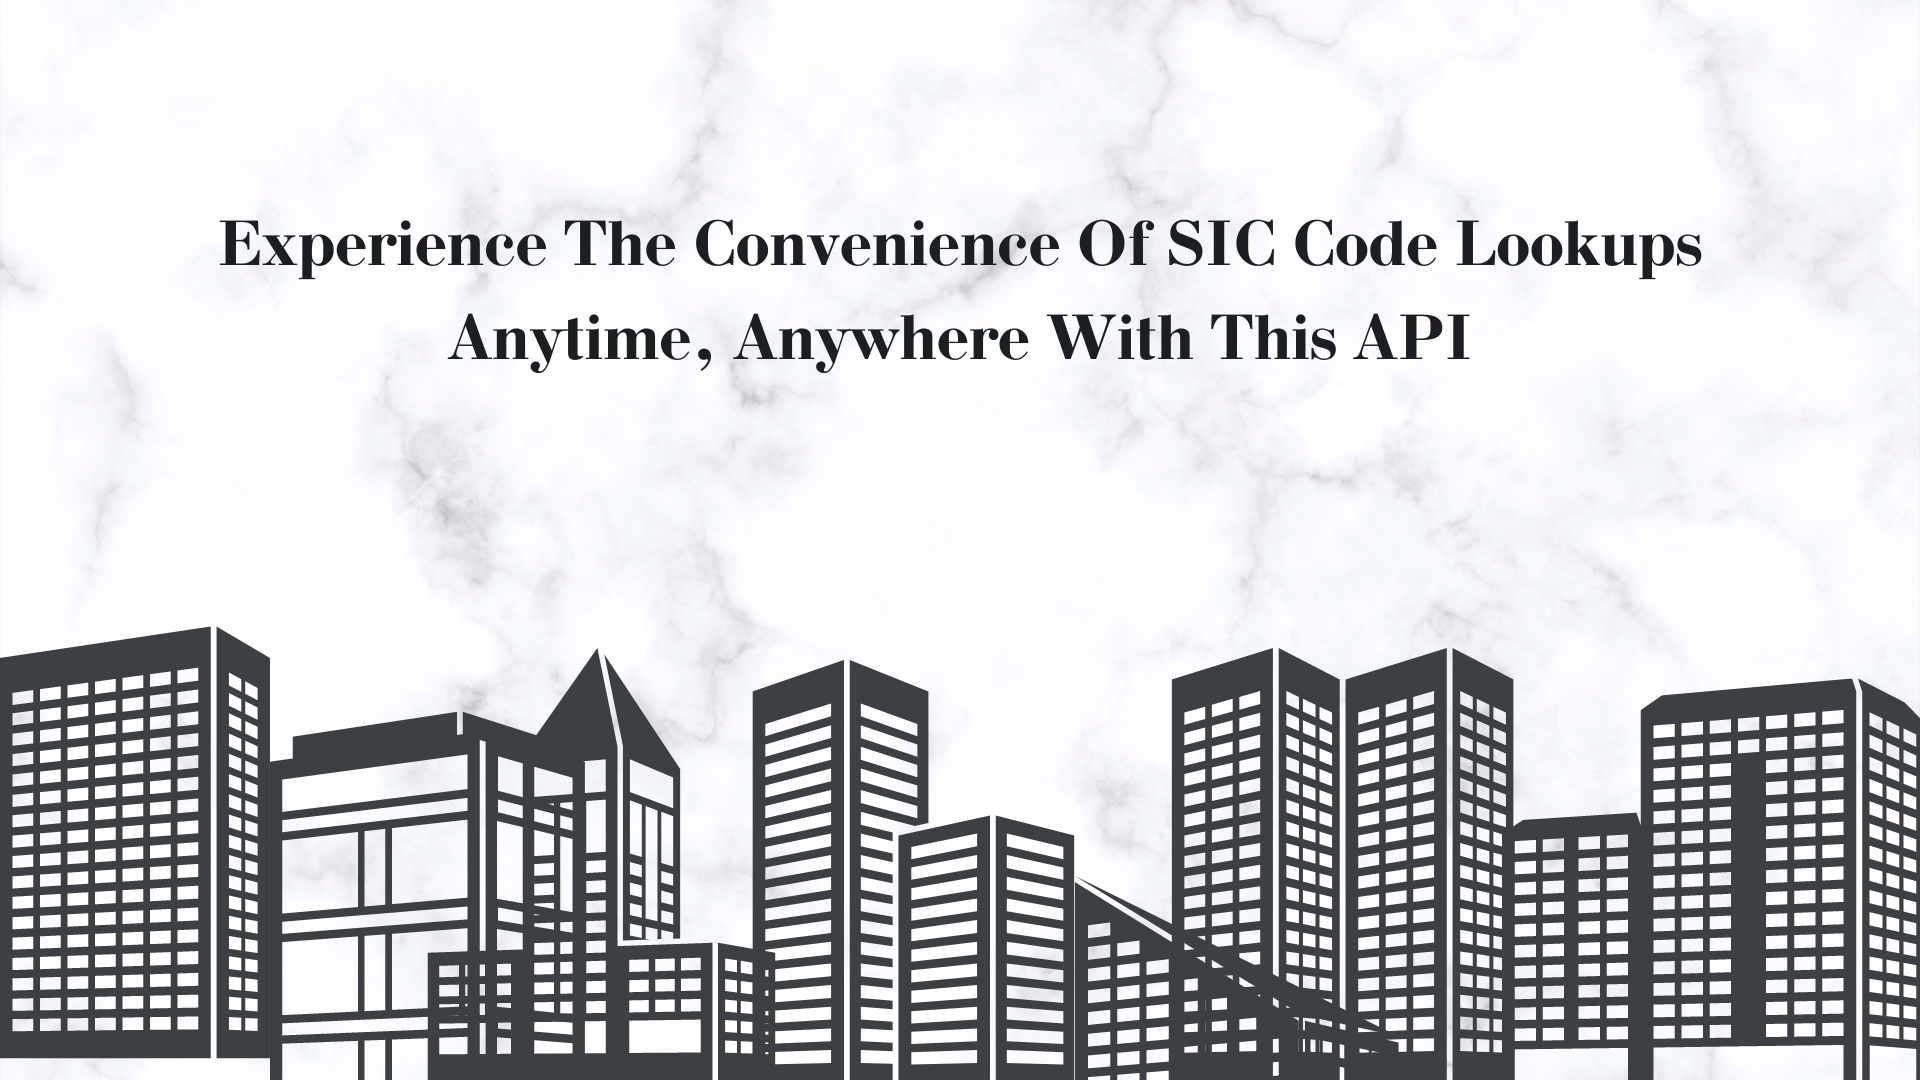 Experience The Convenience Of SIC Code Lookups Anytime, Anywhere With This API